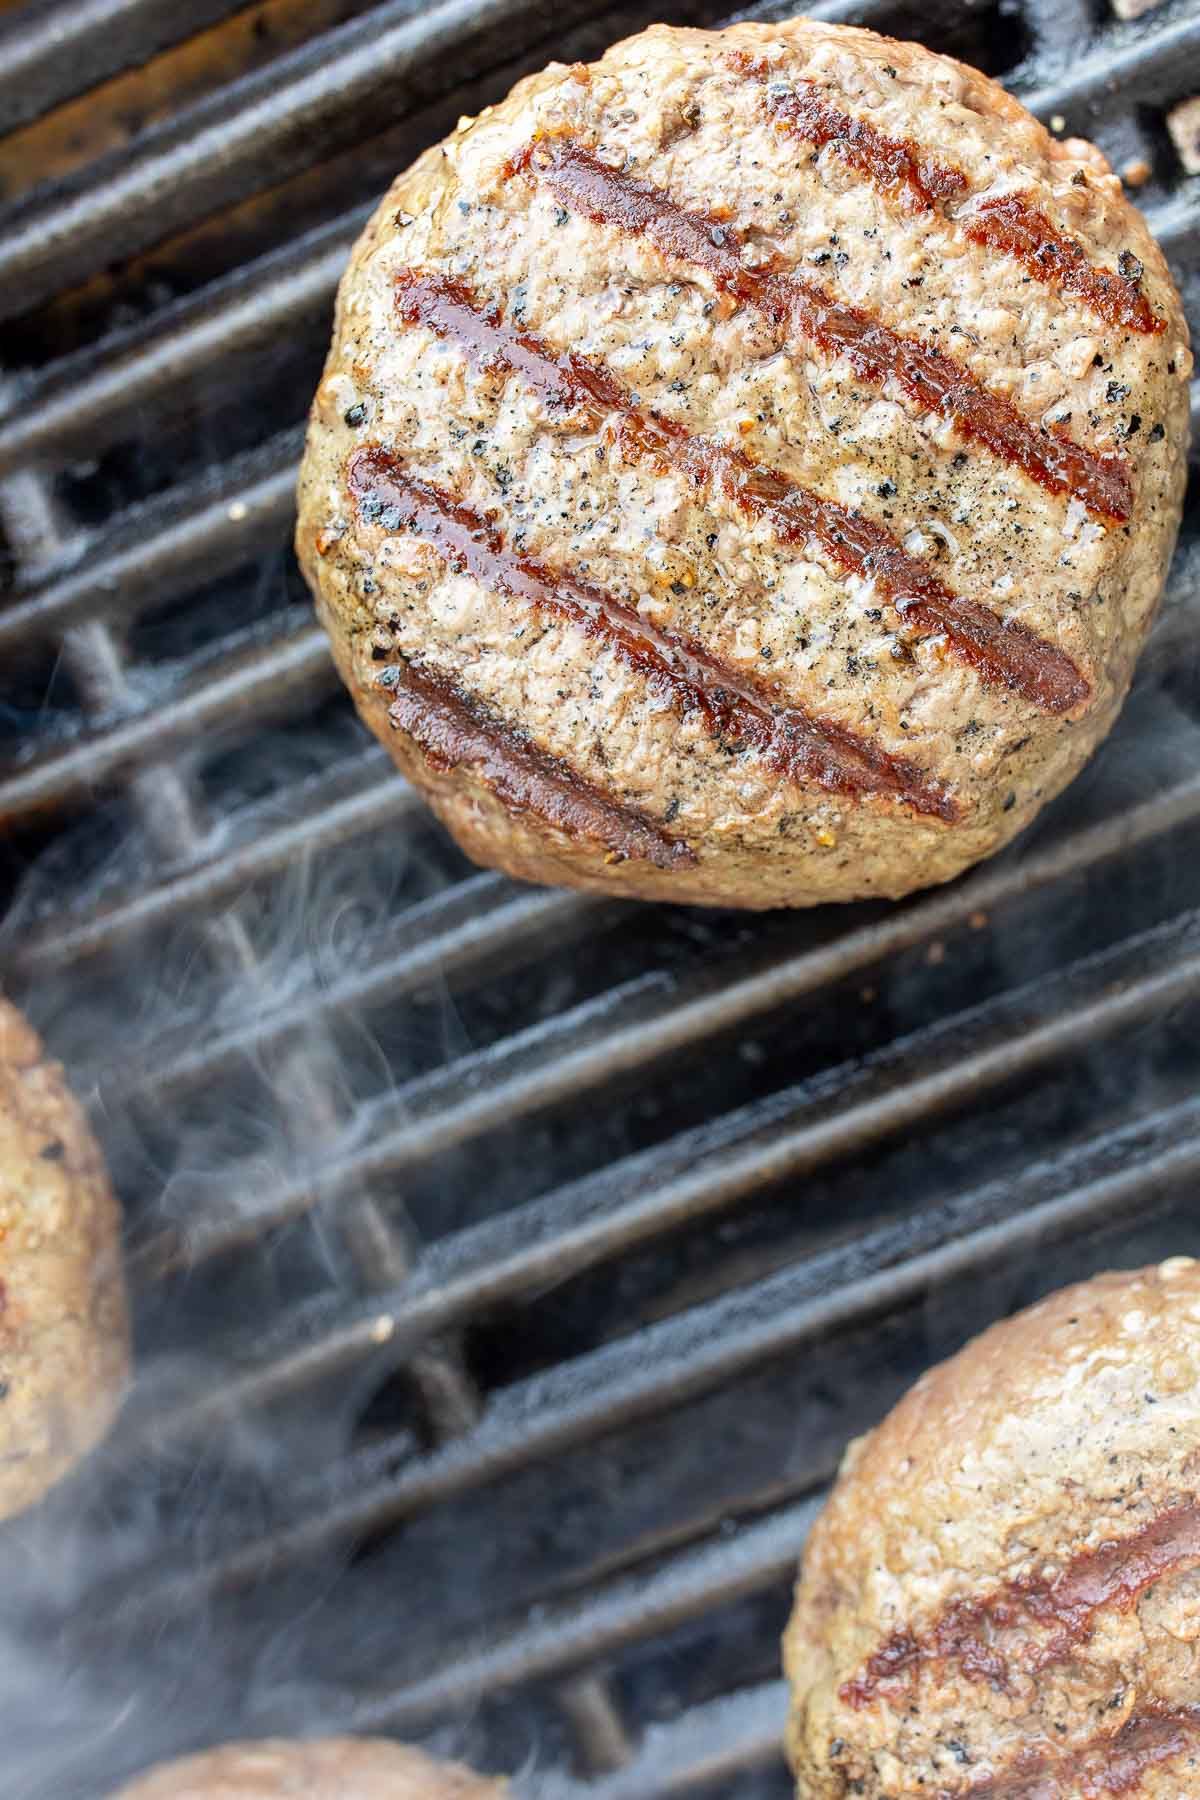 A grill with burgers cooking on the grill grate